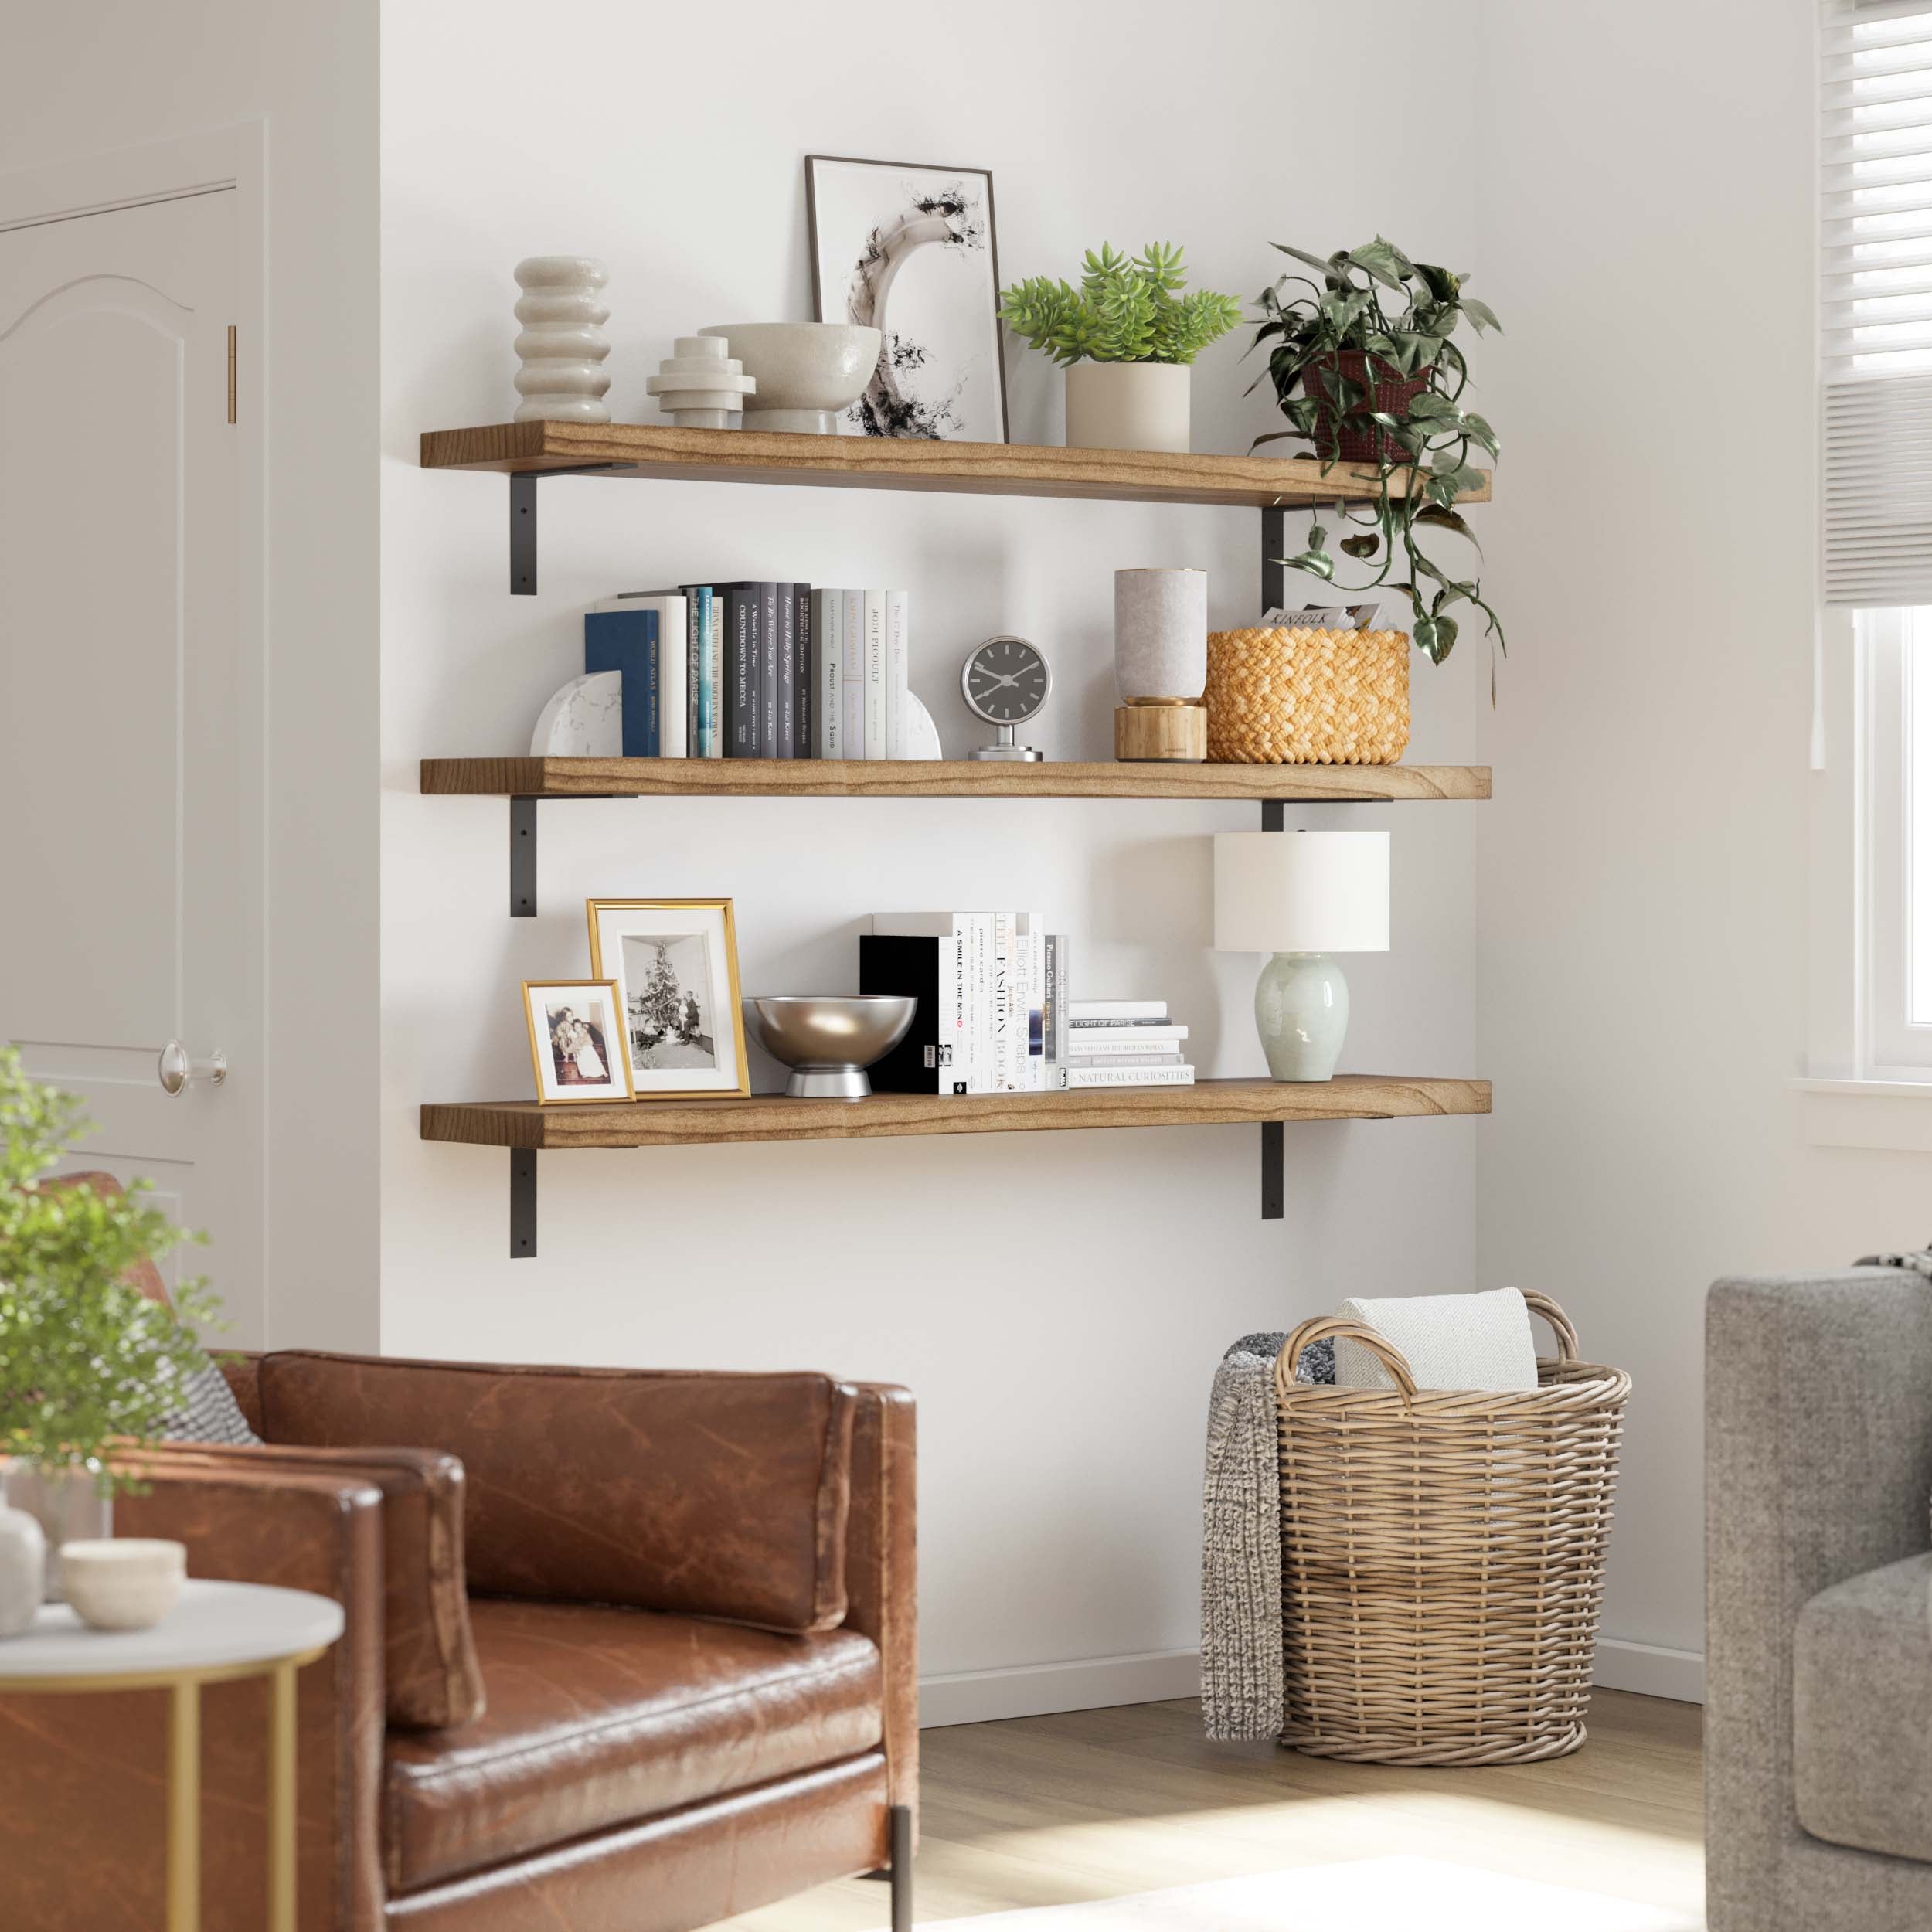 Three rustic floating shelves with plants, frames, books, and decor items create a cozy corner in a room with leather and fabric chairs.